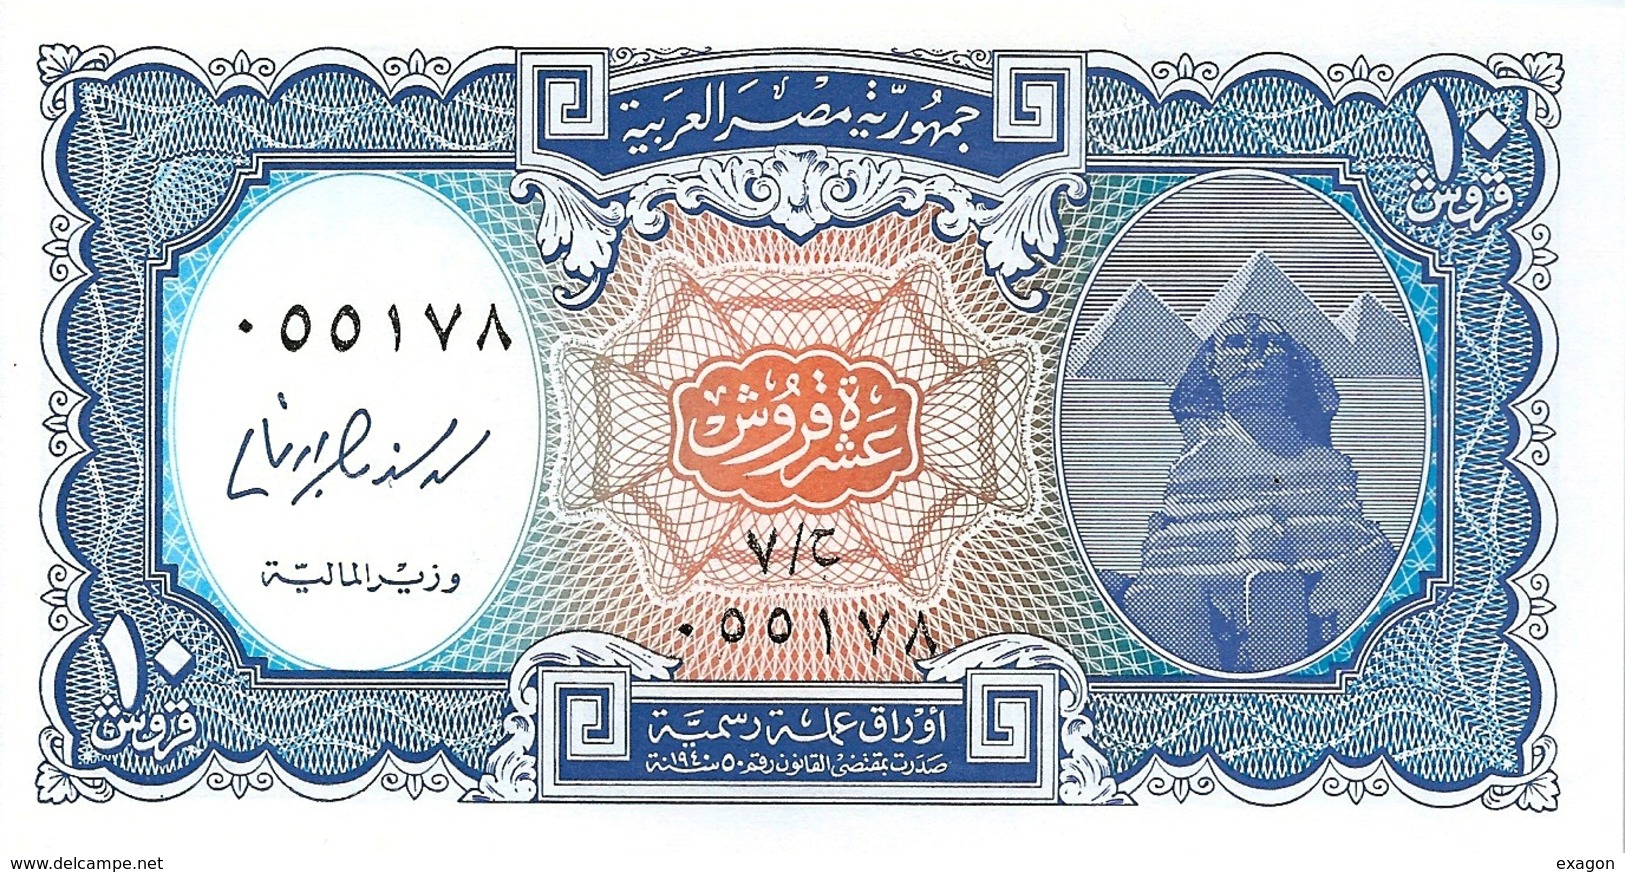 10  PIASTRES  -  EGITTO  -  Issud Under Law - 1940 - Egypte